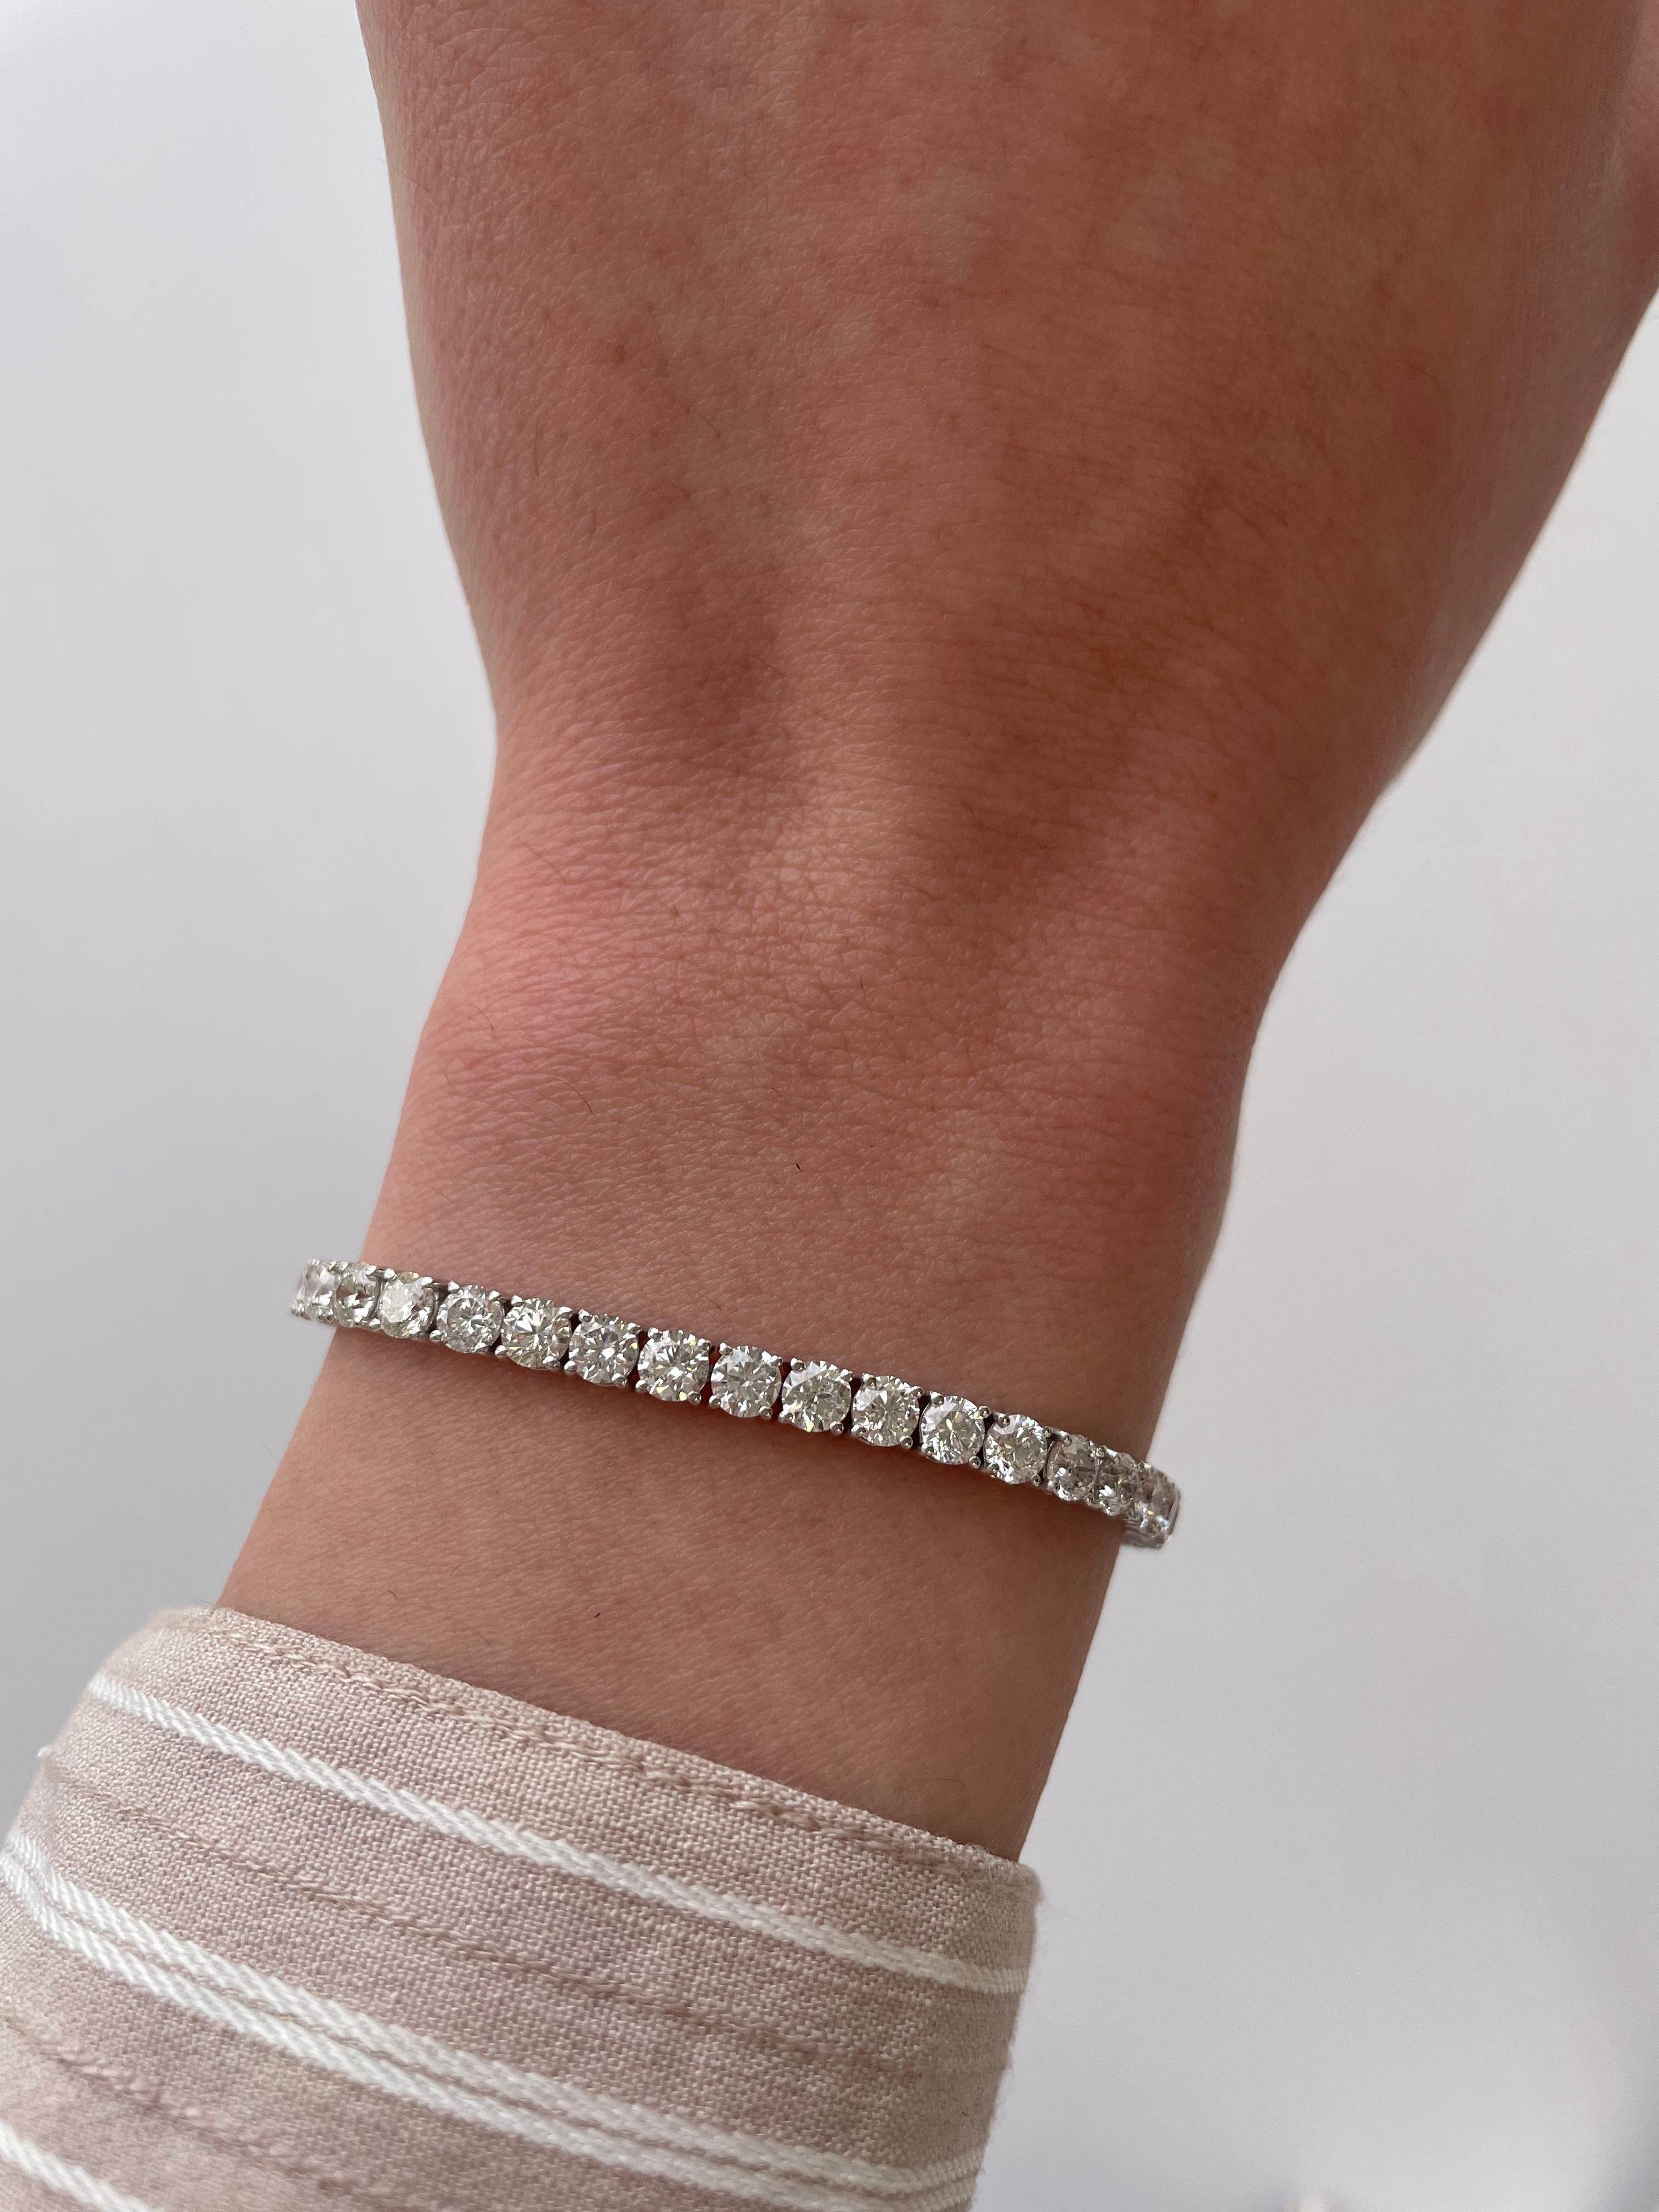 Exquisite and timeless diamonds tennis bracelet, by Alexander Beverly Hills.
48 round brilliant diamonds, 8.80 carats. Approximately D-F color and SI clarity. Four prong set in 18k white gold, 9.76 grams, 7 inches. 
Accommodated with an up-to-date